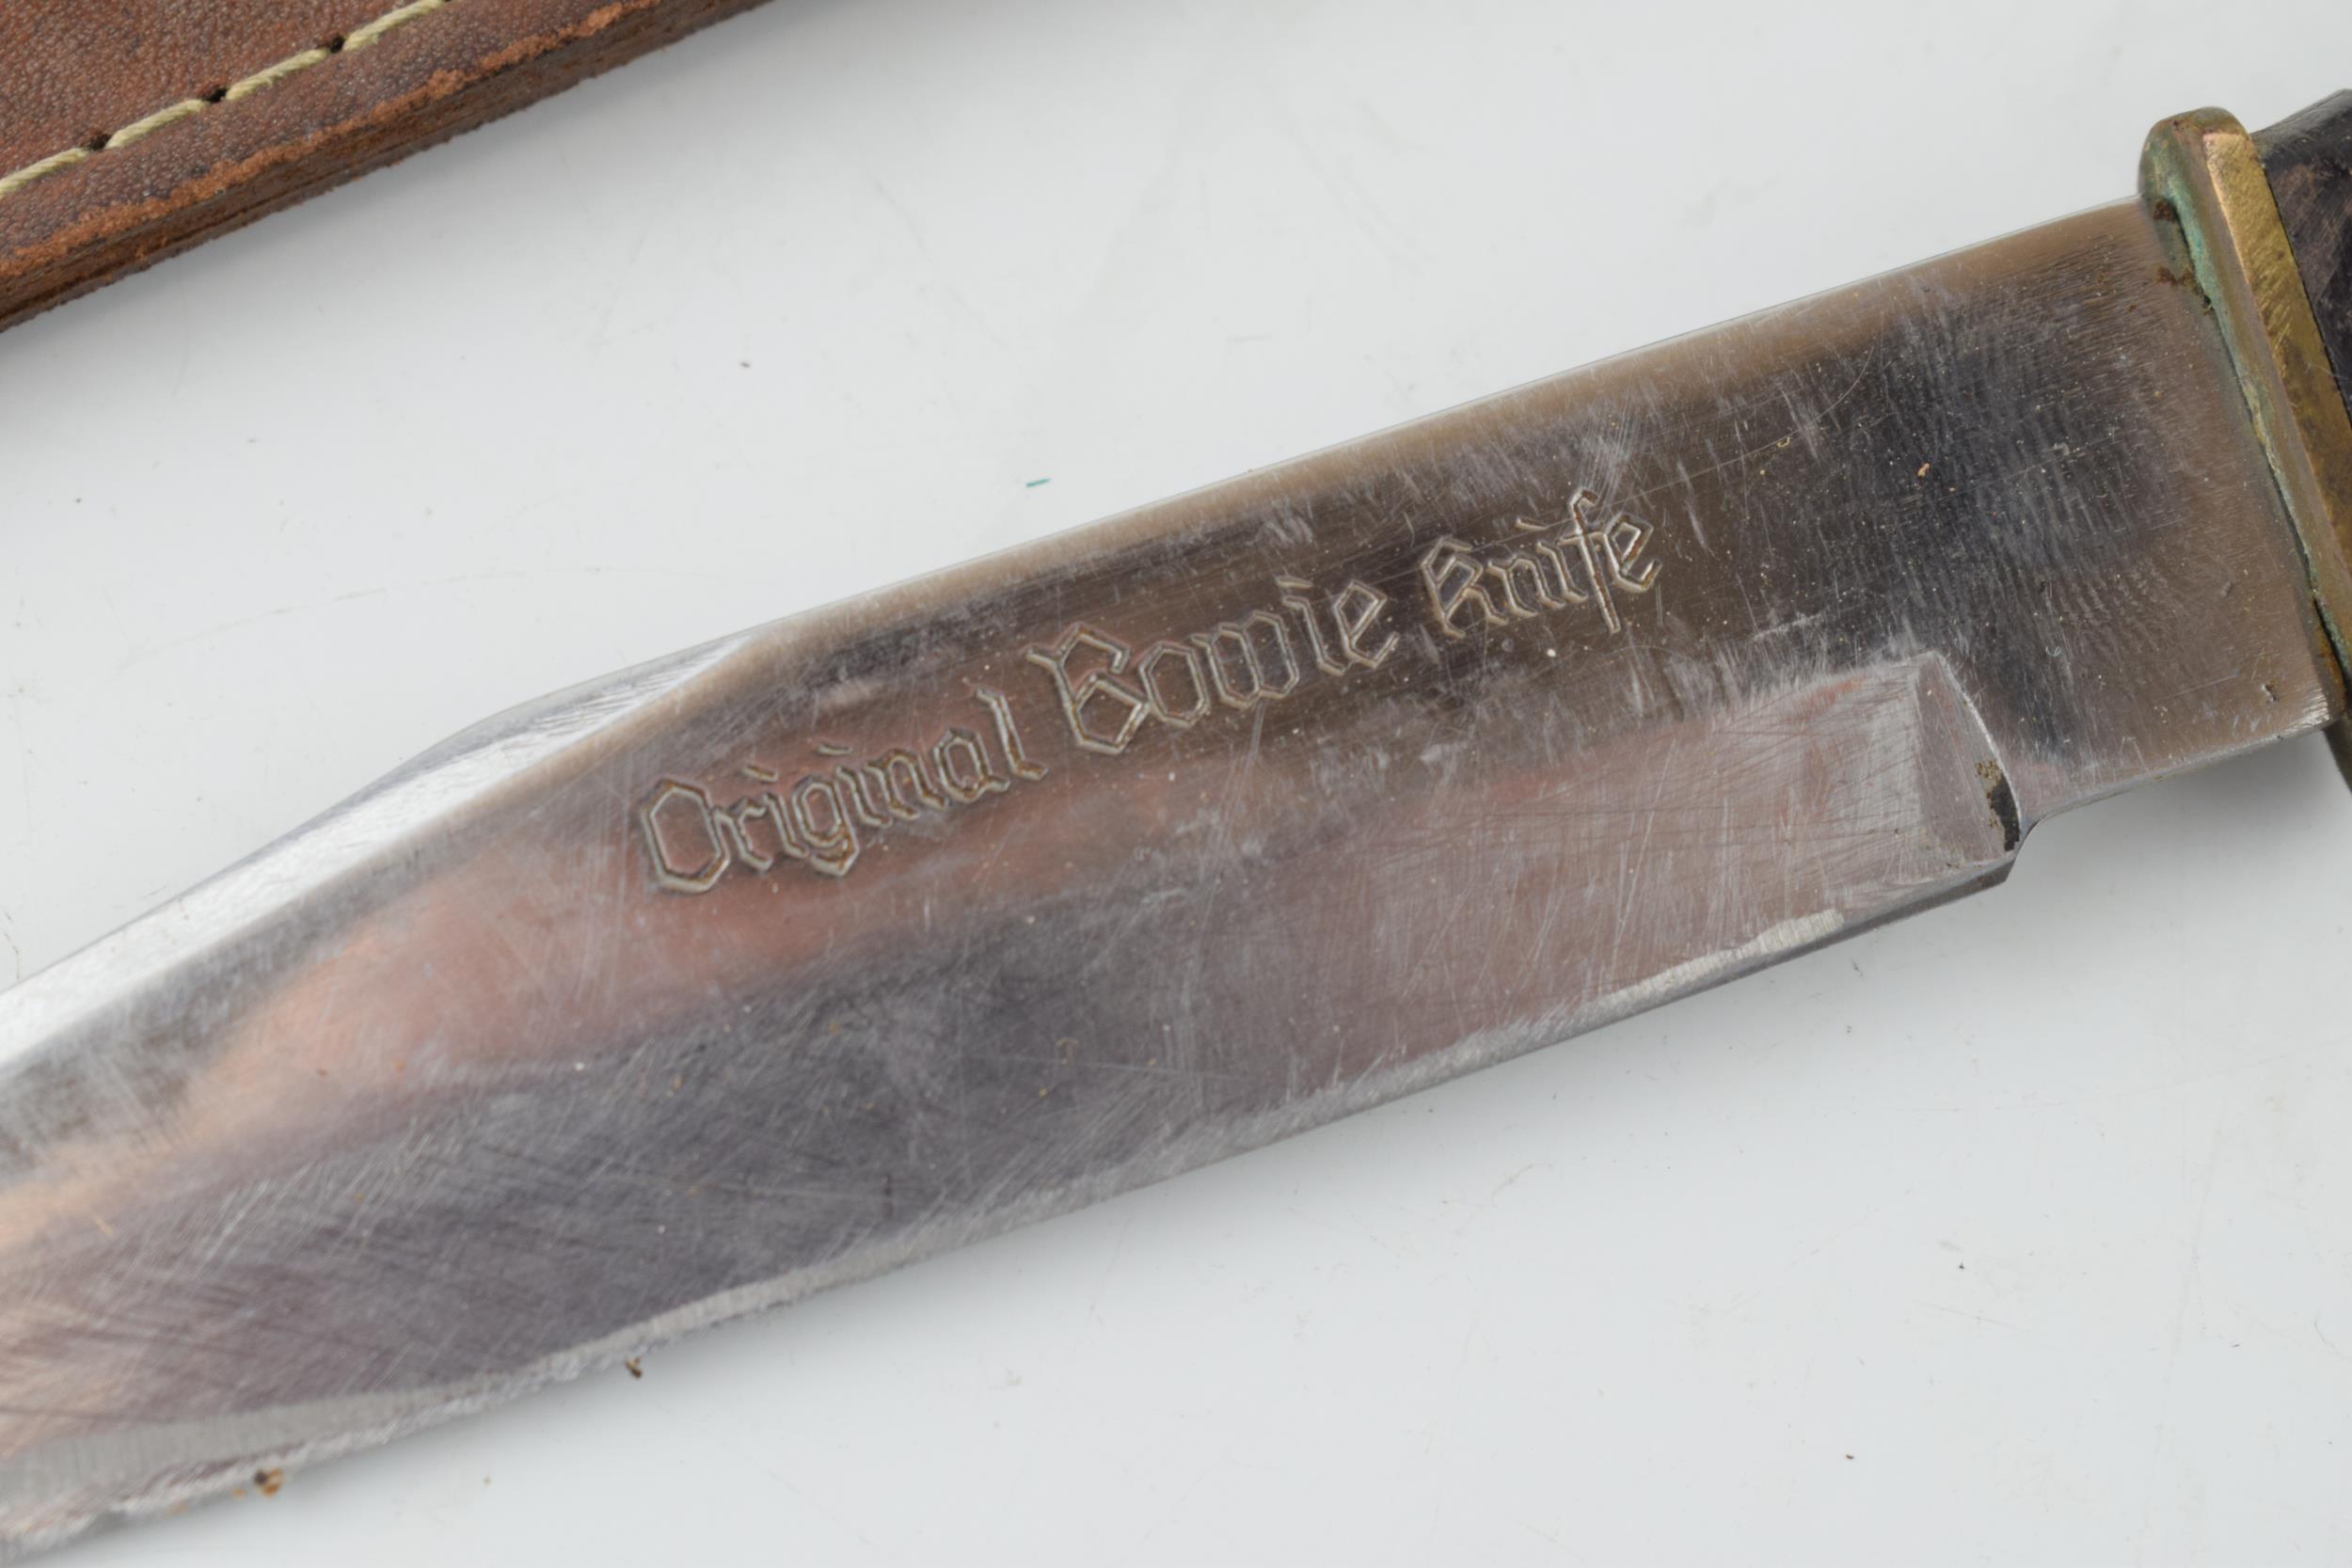 Bowie knife in leather sheath, 'Made in Japan'. Lather handle, 'Stainless Steel Blade', 'Original - Image 2 of 3